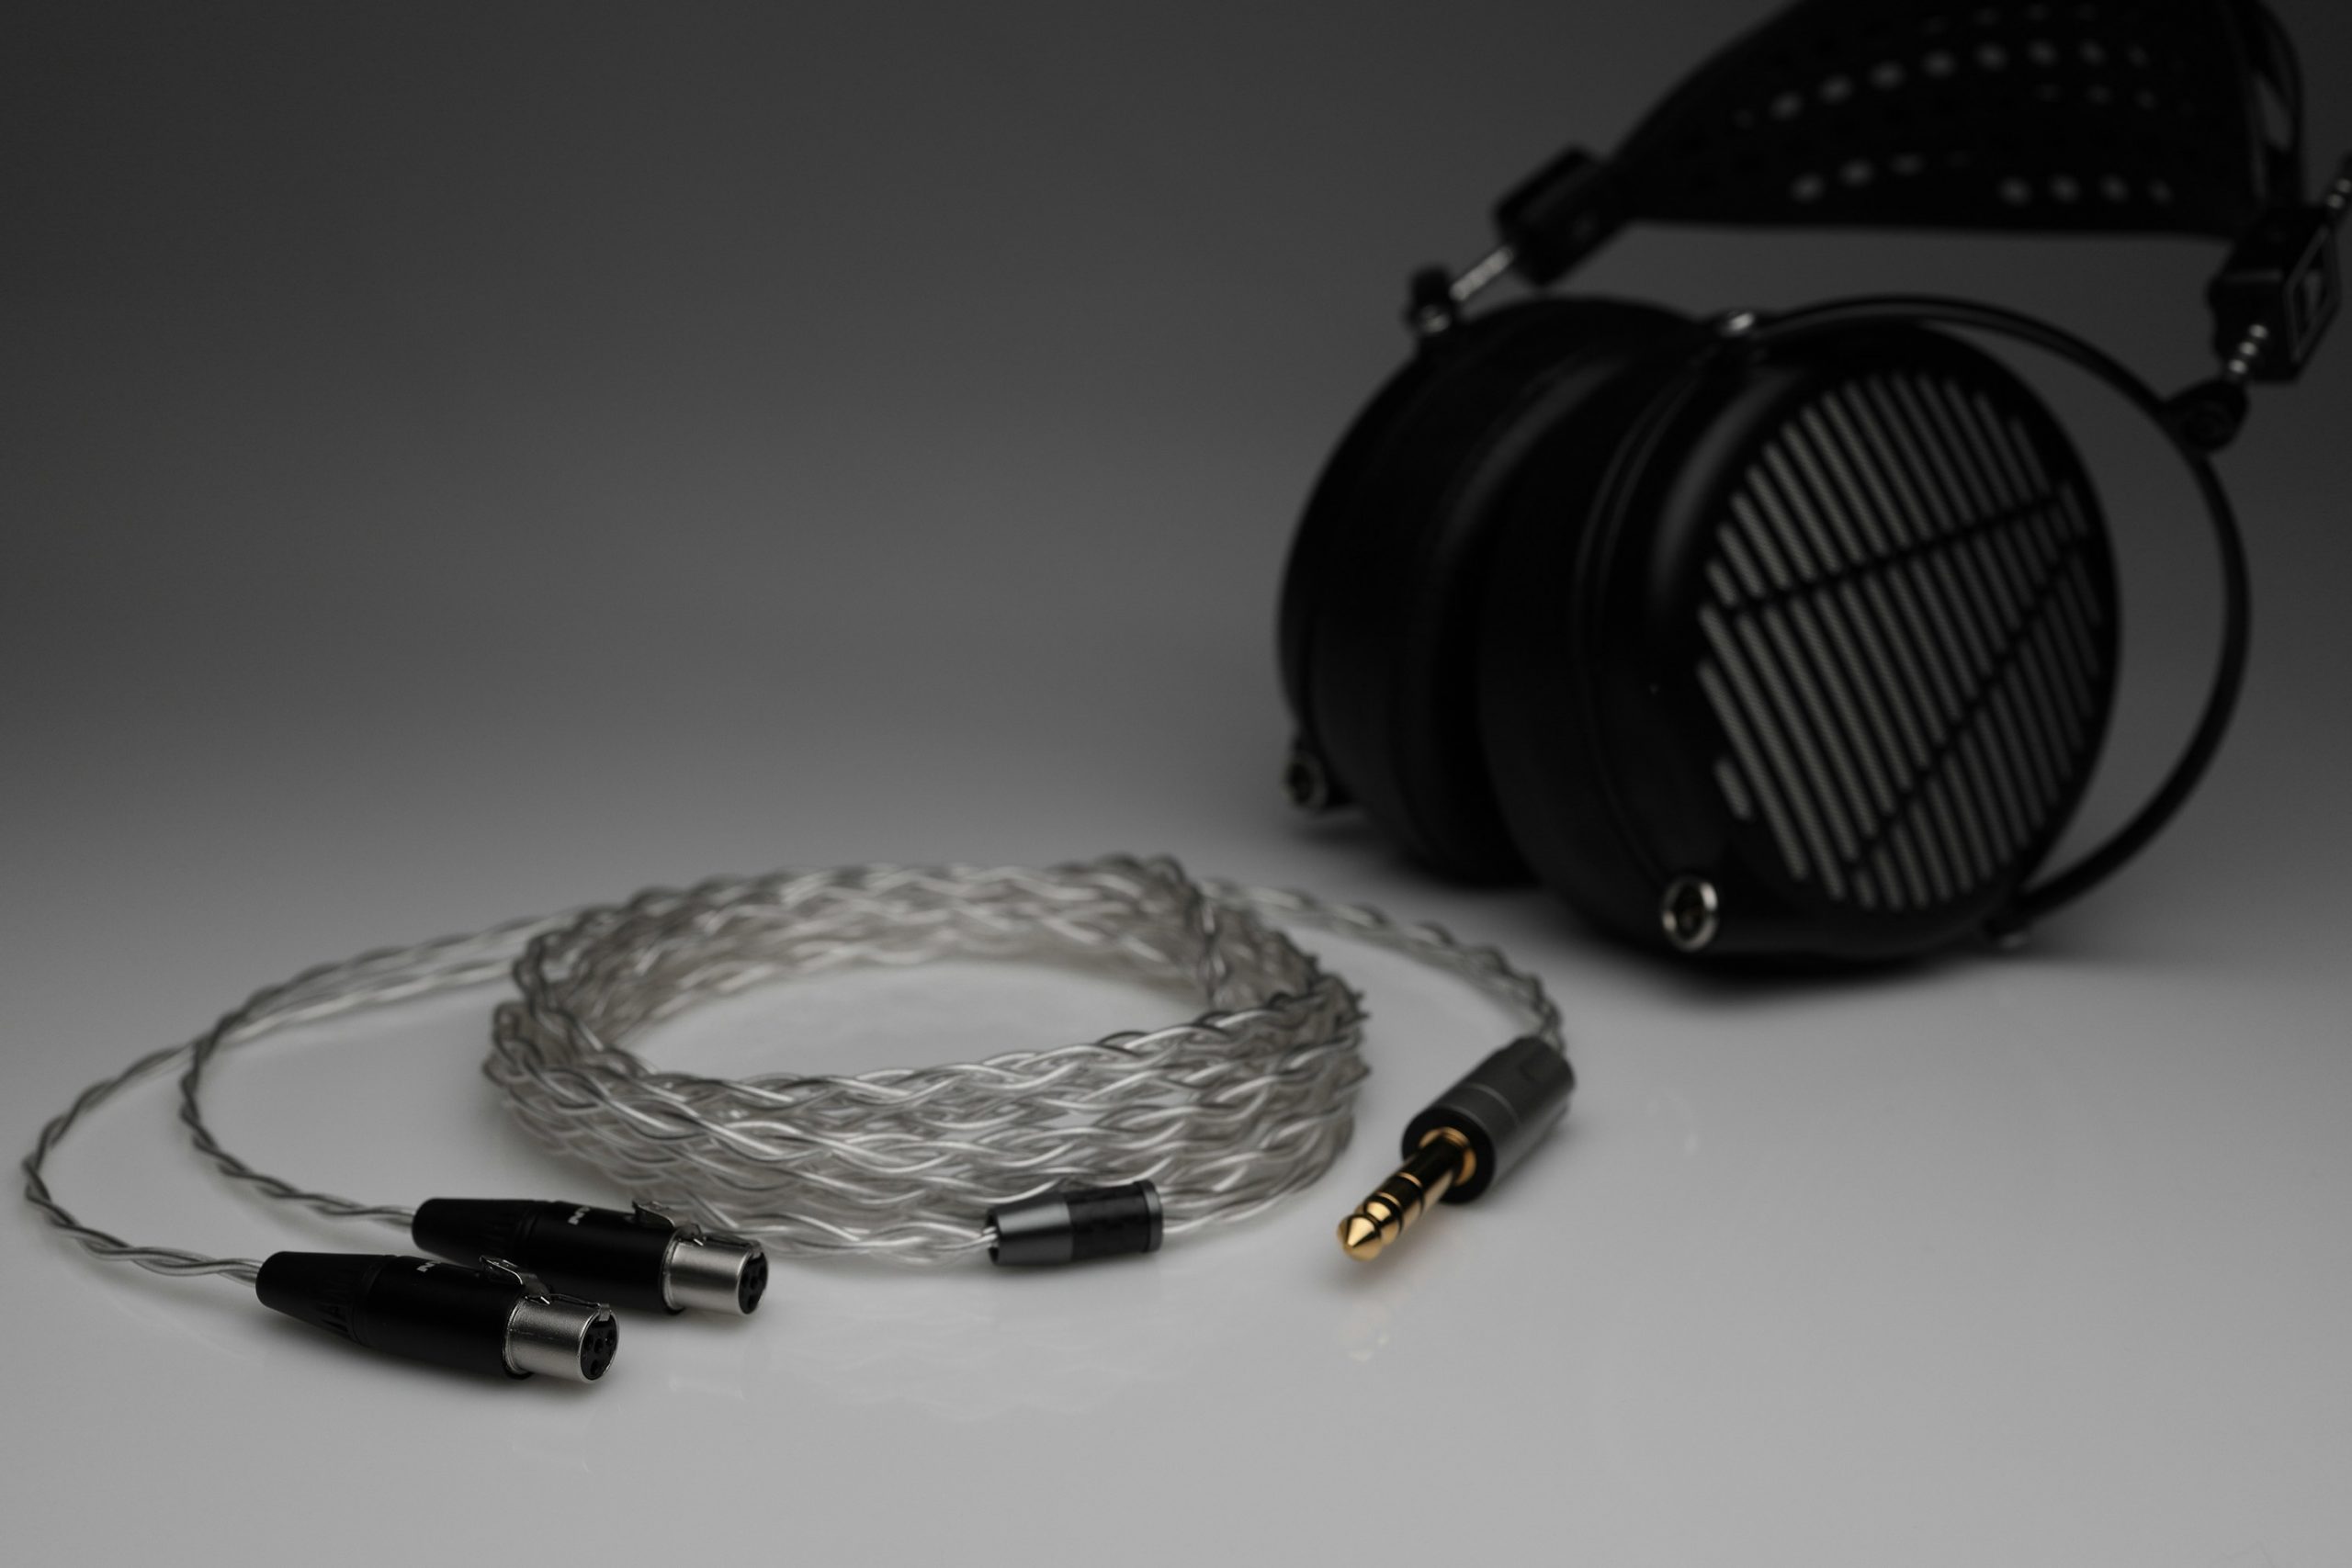 Ultimate Silver Audeze LCD2 LCD3 LCD4 LCD X CX MX4 MM-500 upgrade cable